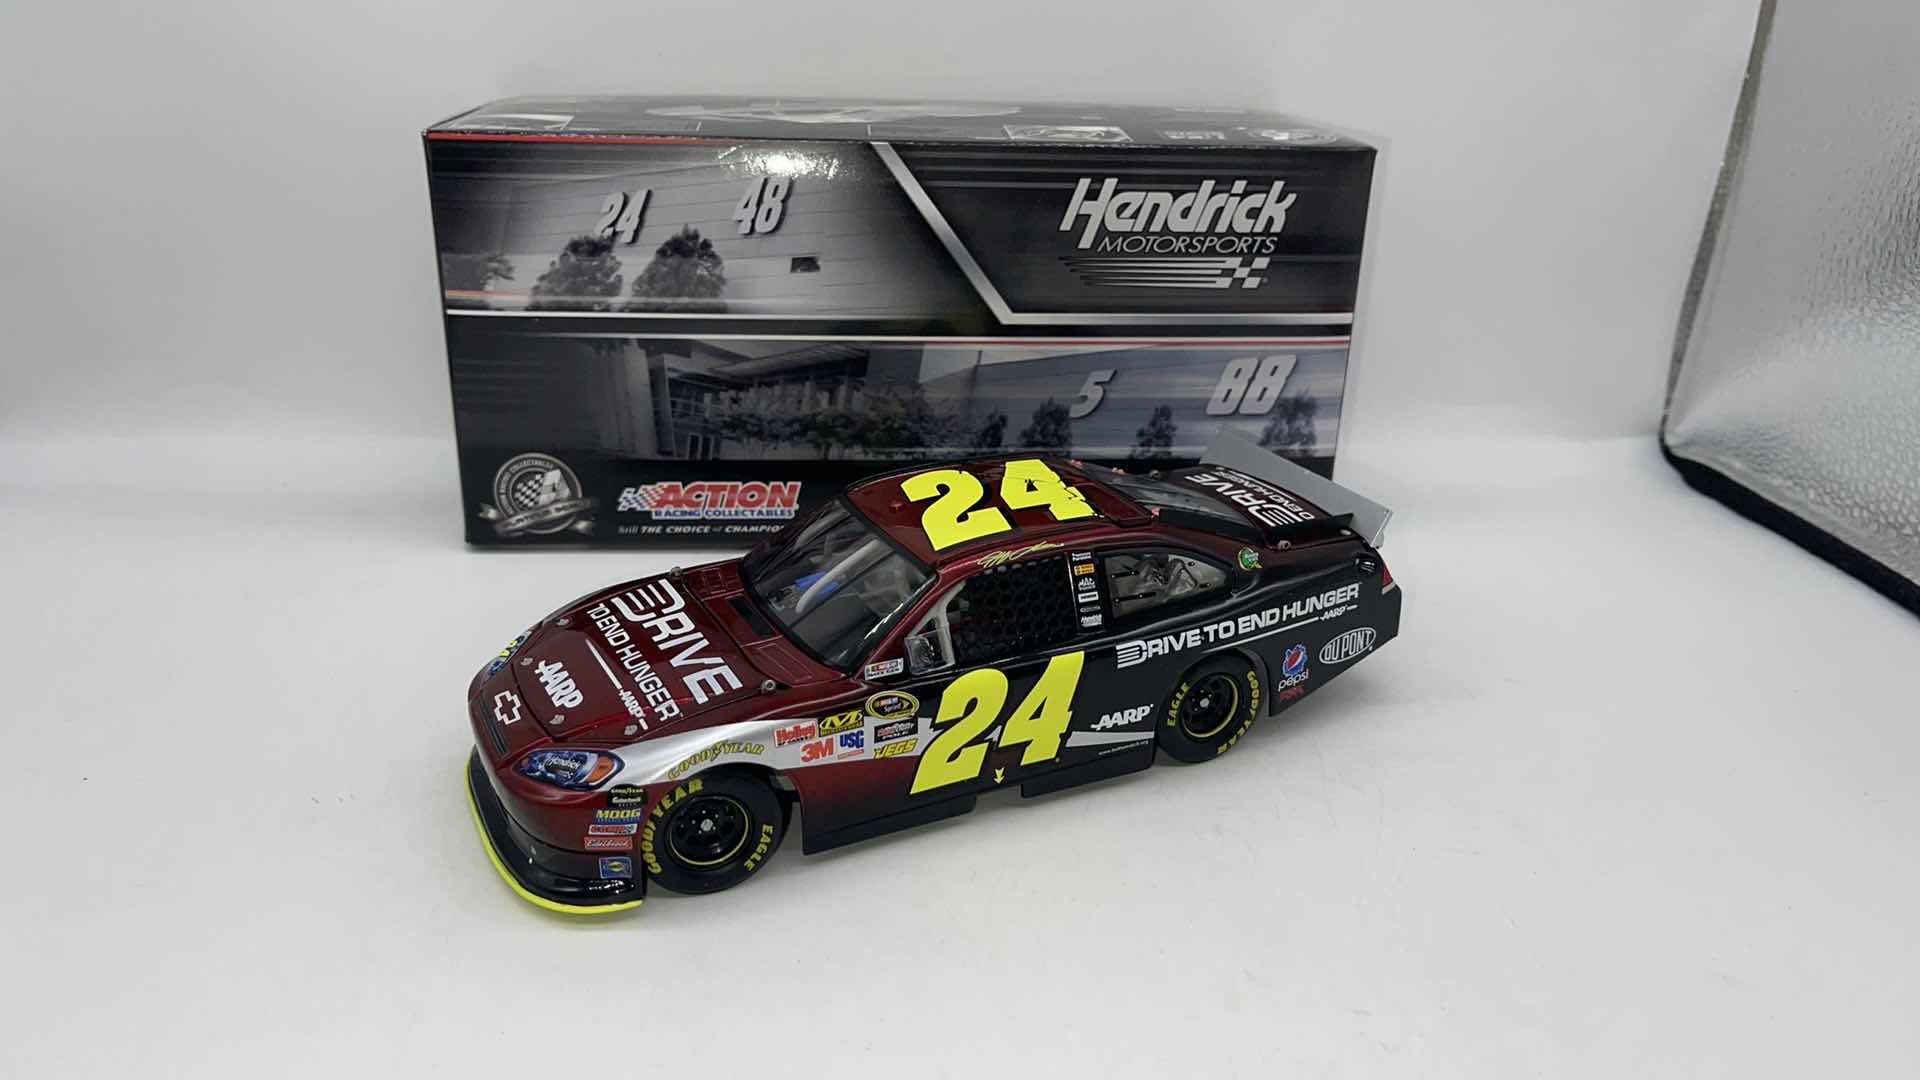 Photo 1 of 2011 JEFF GORDON #24 AARP DRICE TO END HUNGER 1:24 NASCAR DIECAST 